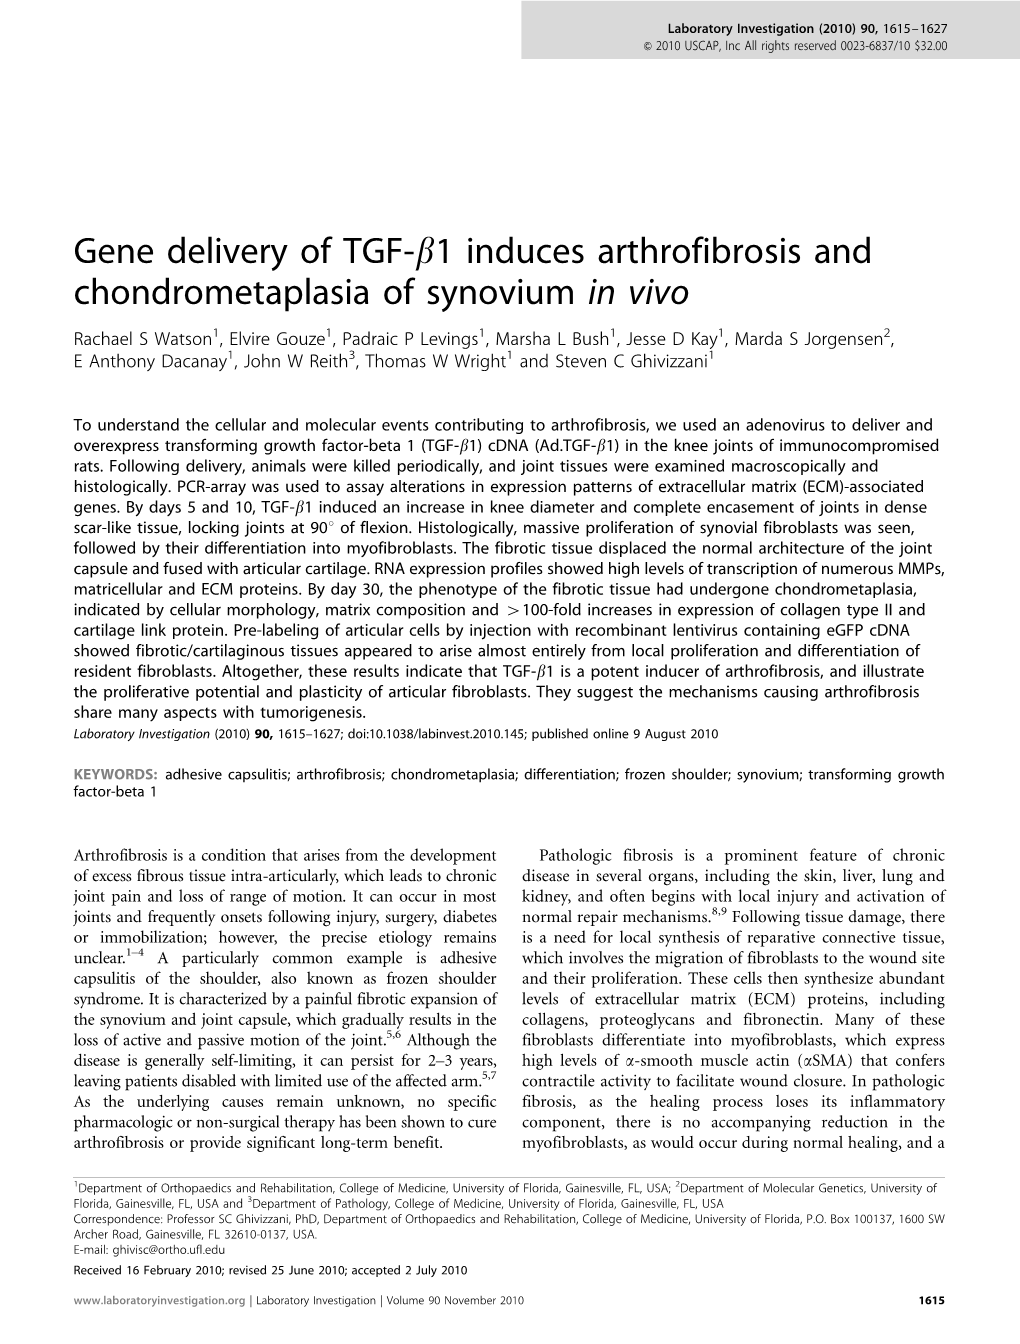 Gene Delivery of TGF-&Beta;1 Induces Arthrofibrosis And